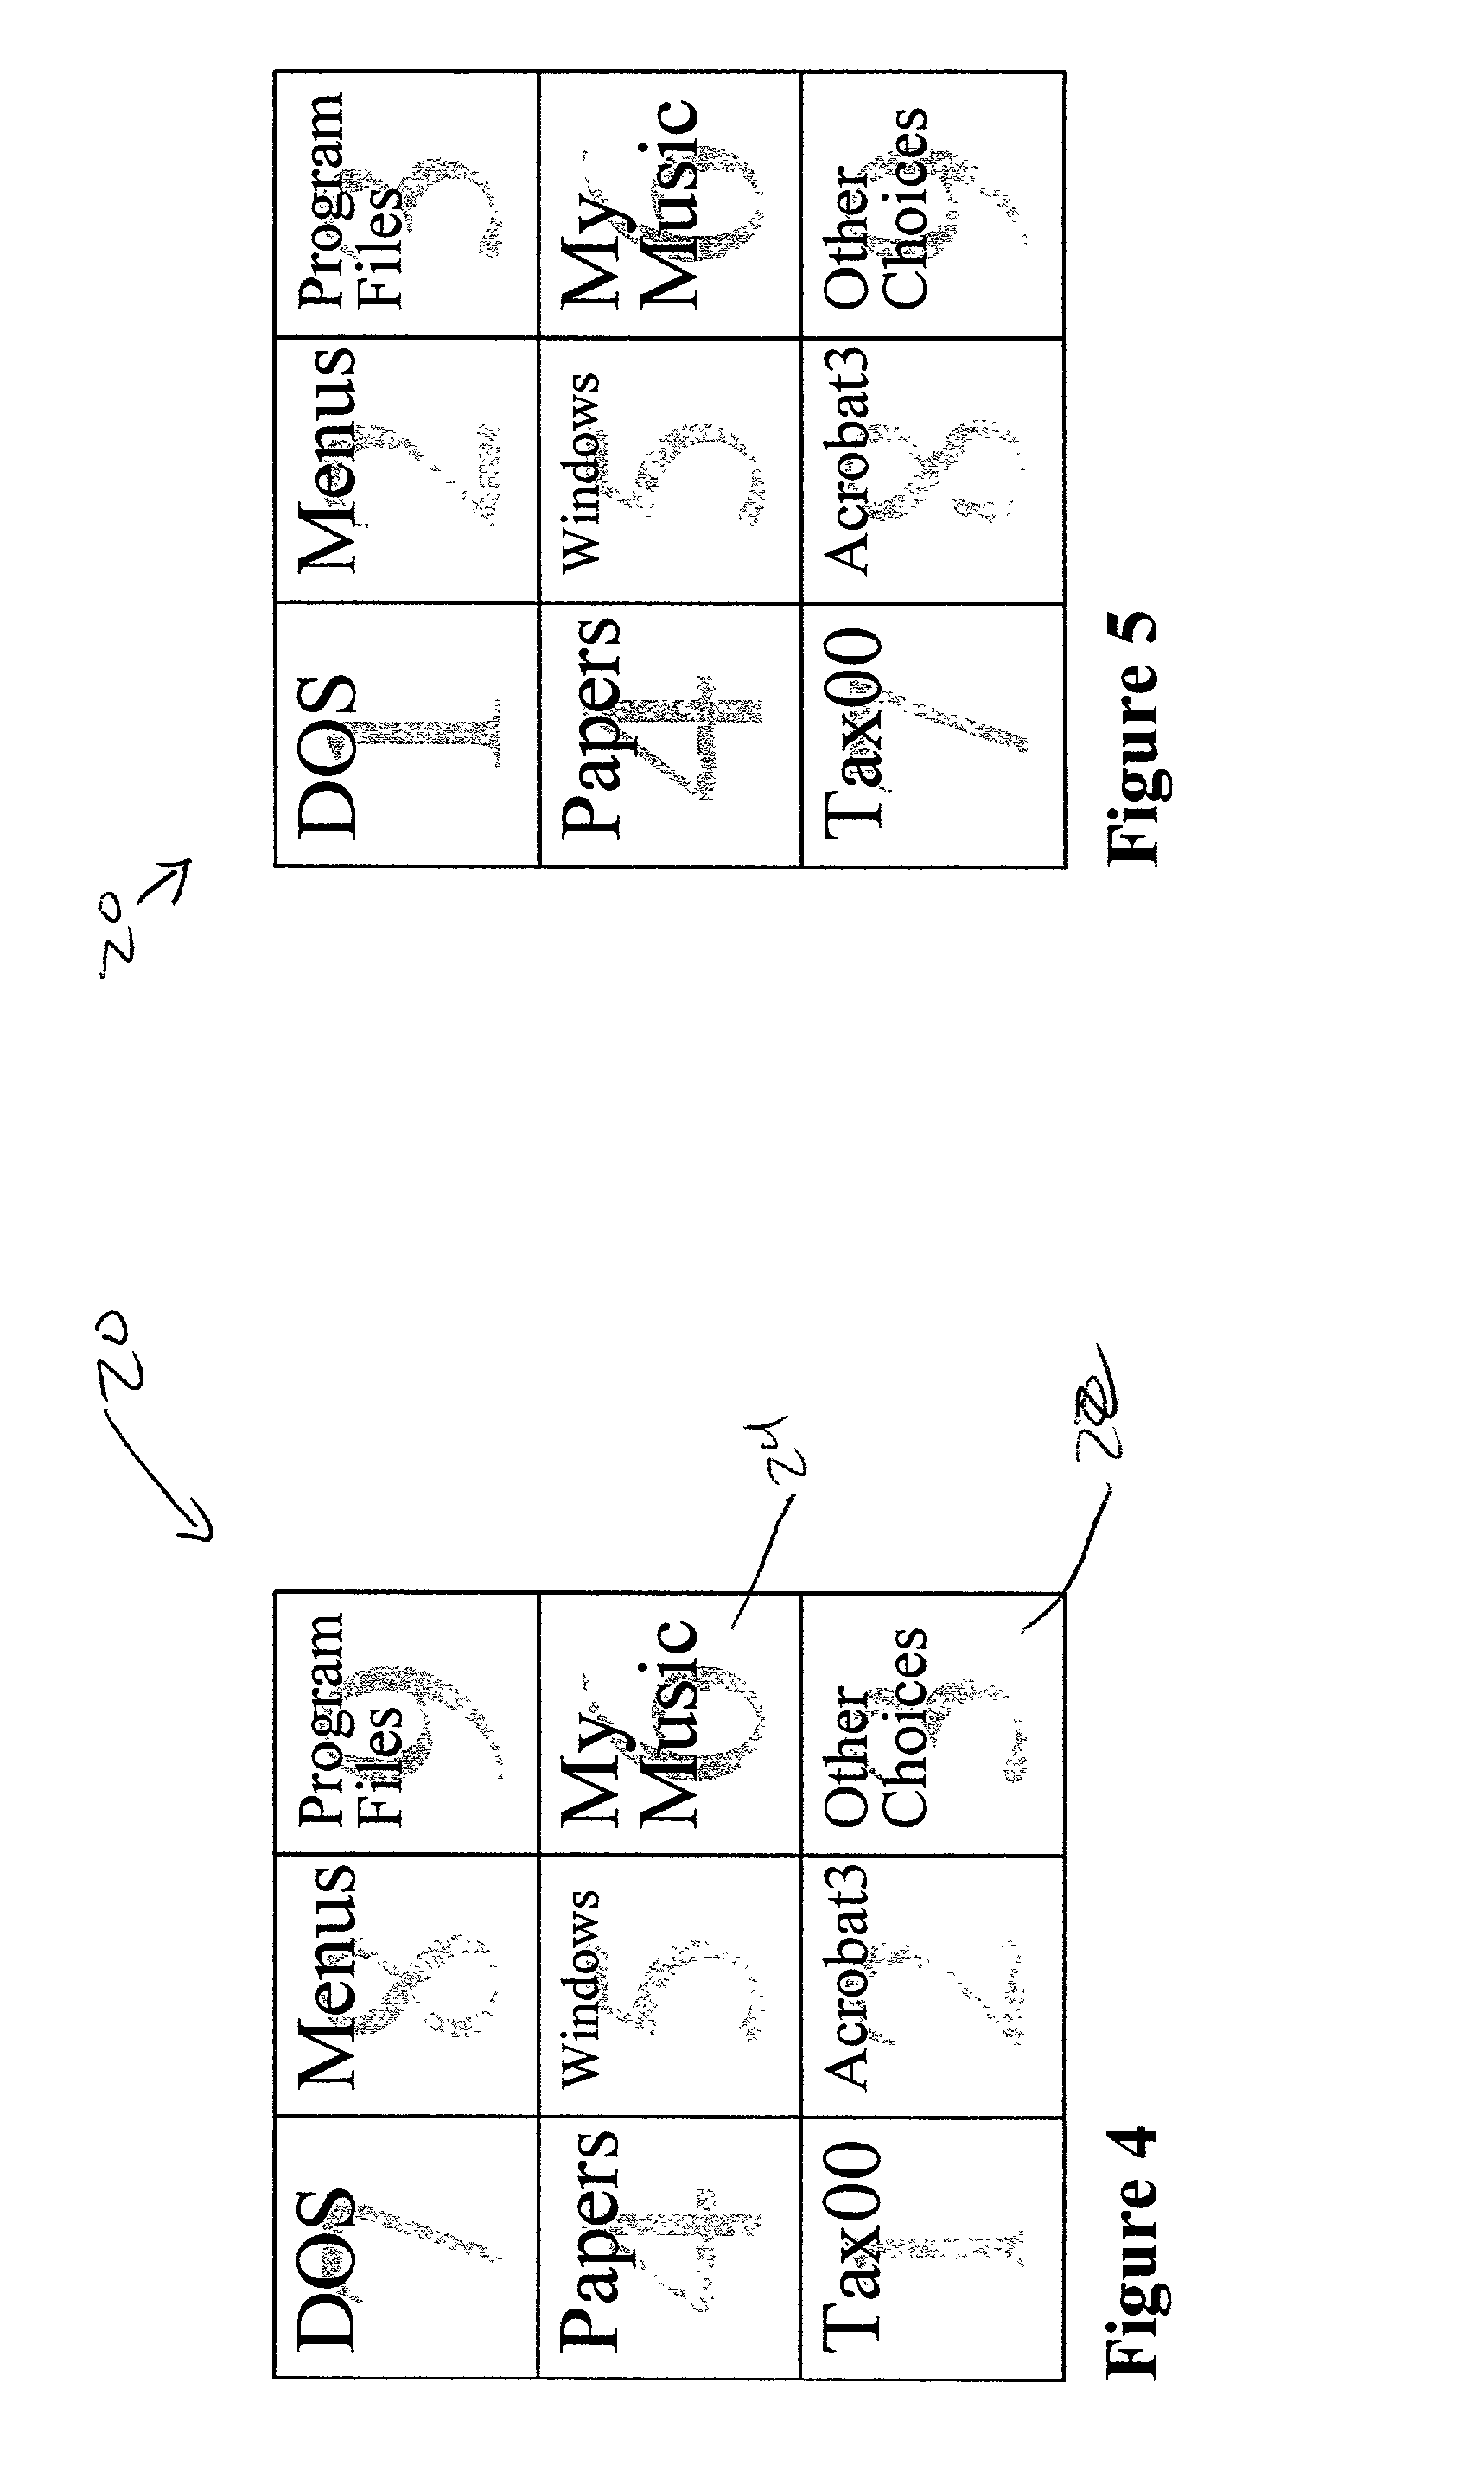 Apparatus and method for navigating electronic files using an array display